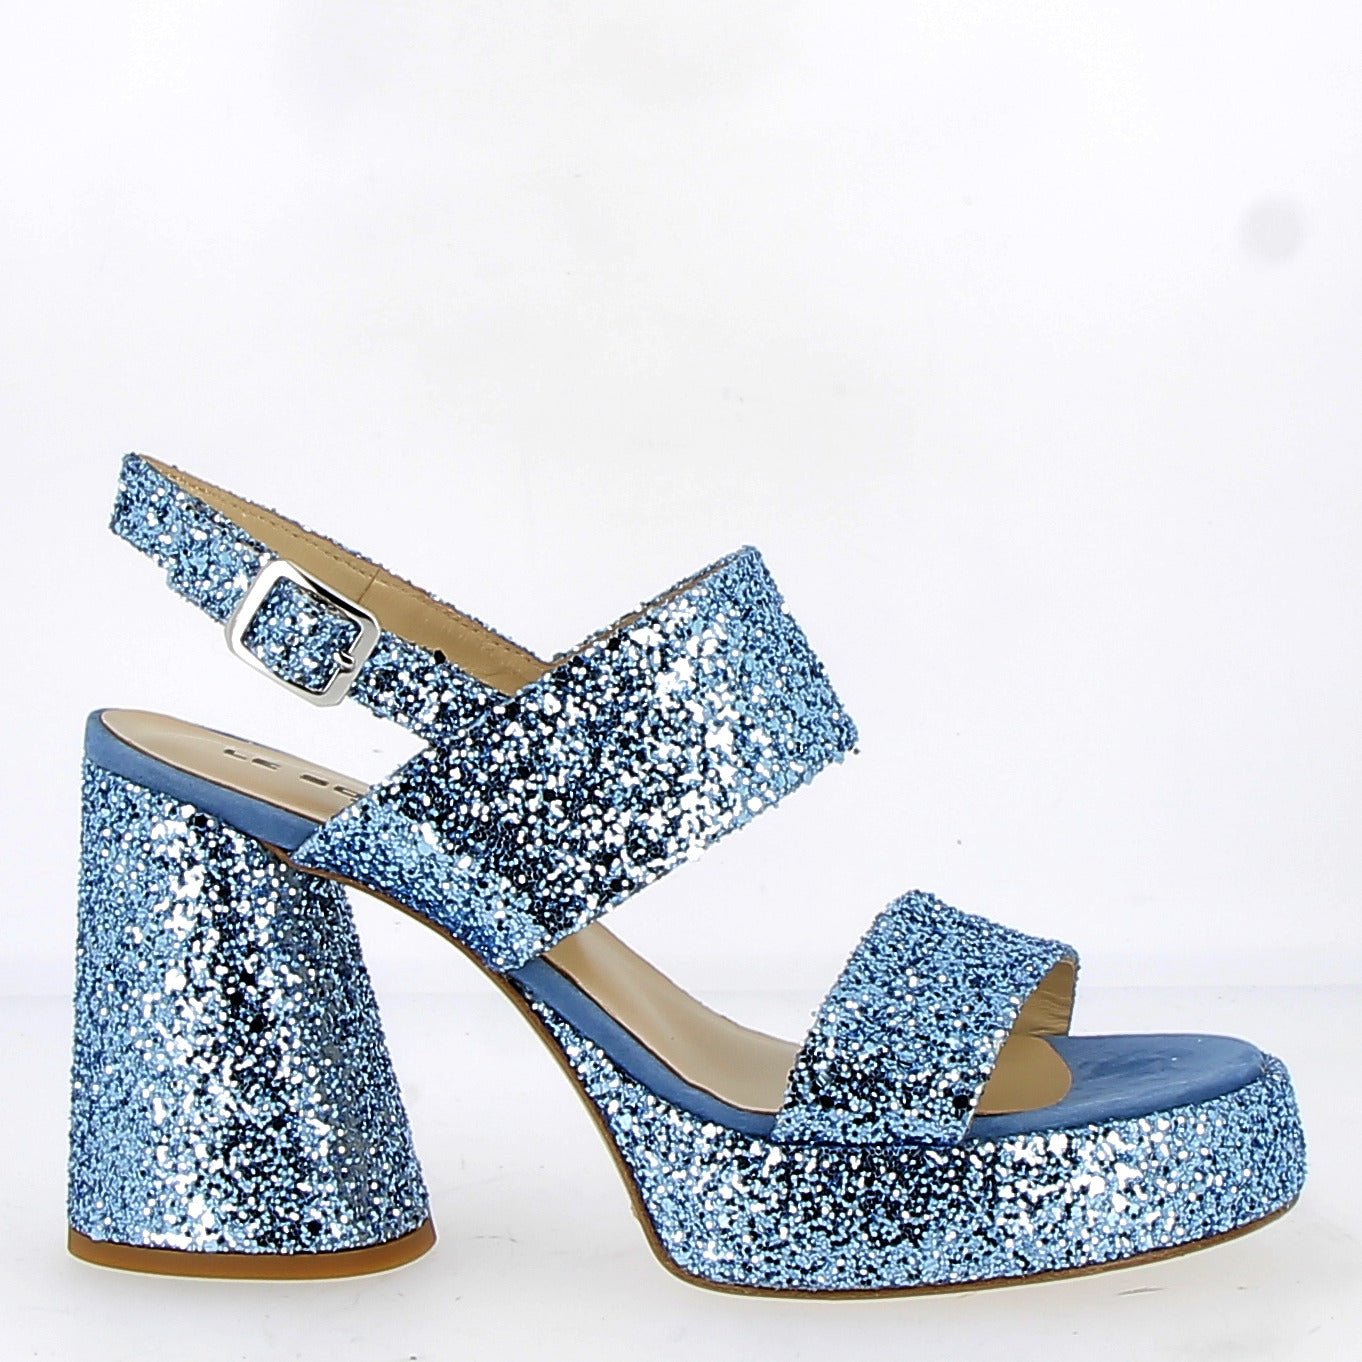 Sandal in light blue glitter with plateau